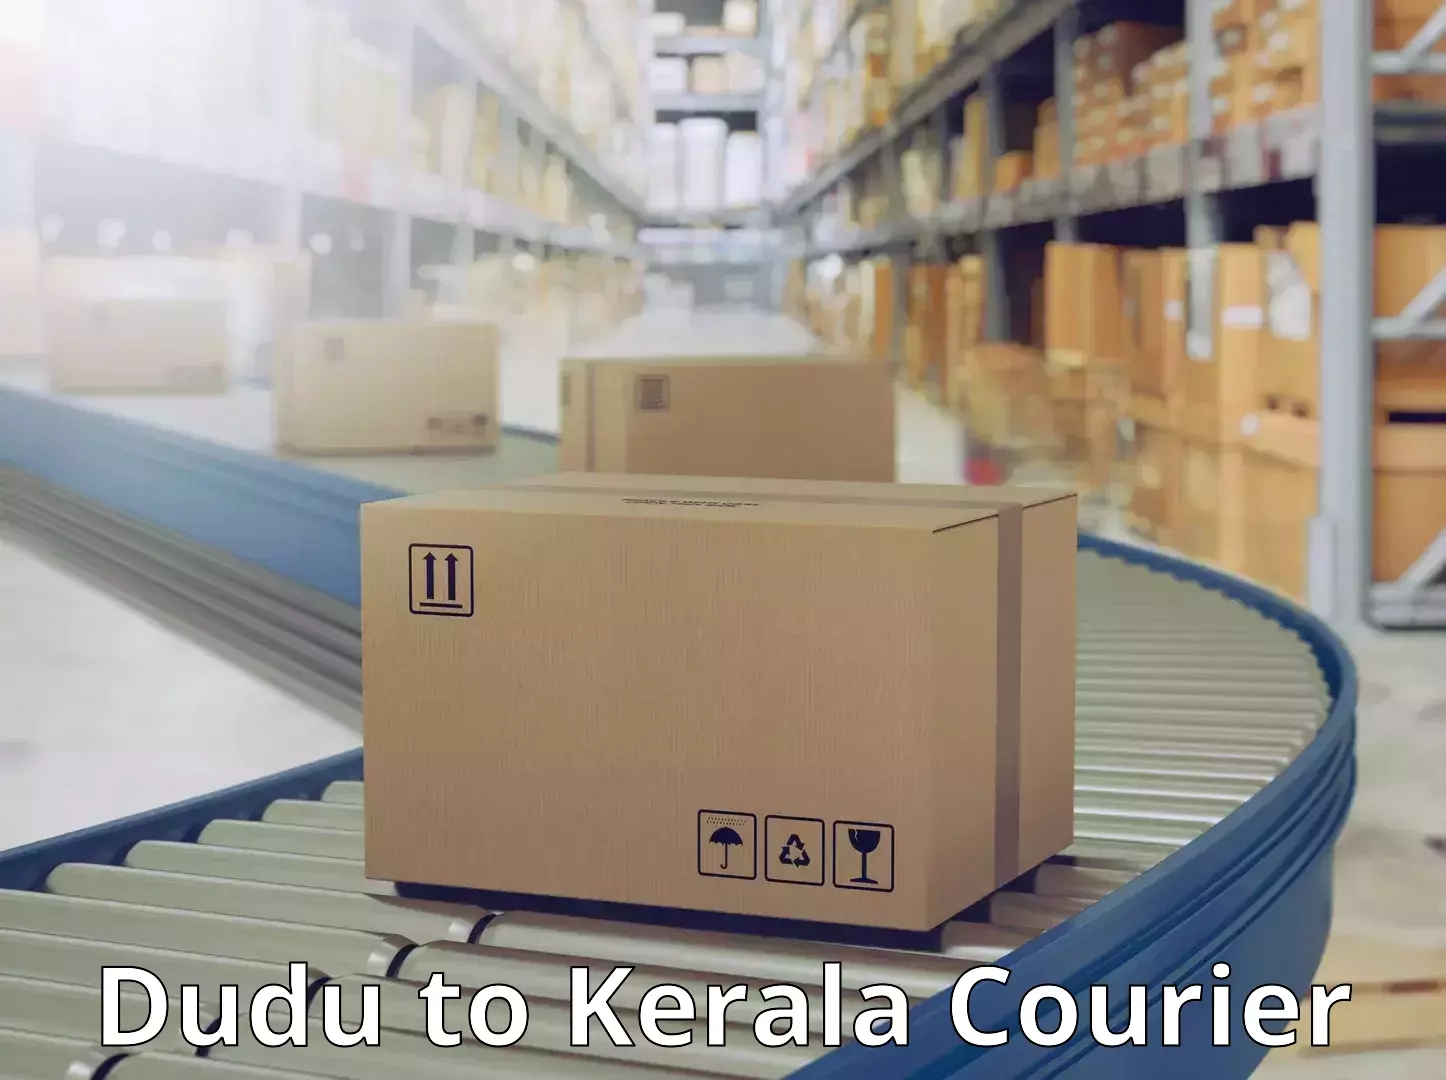 Same-day delivery solutions Dudu to Kerala